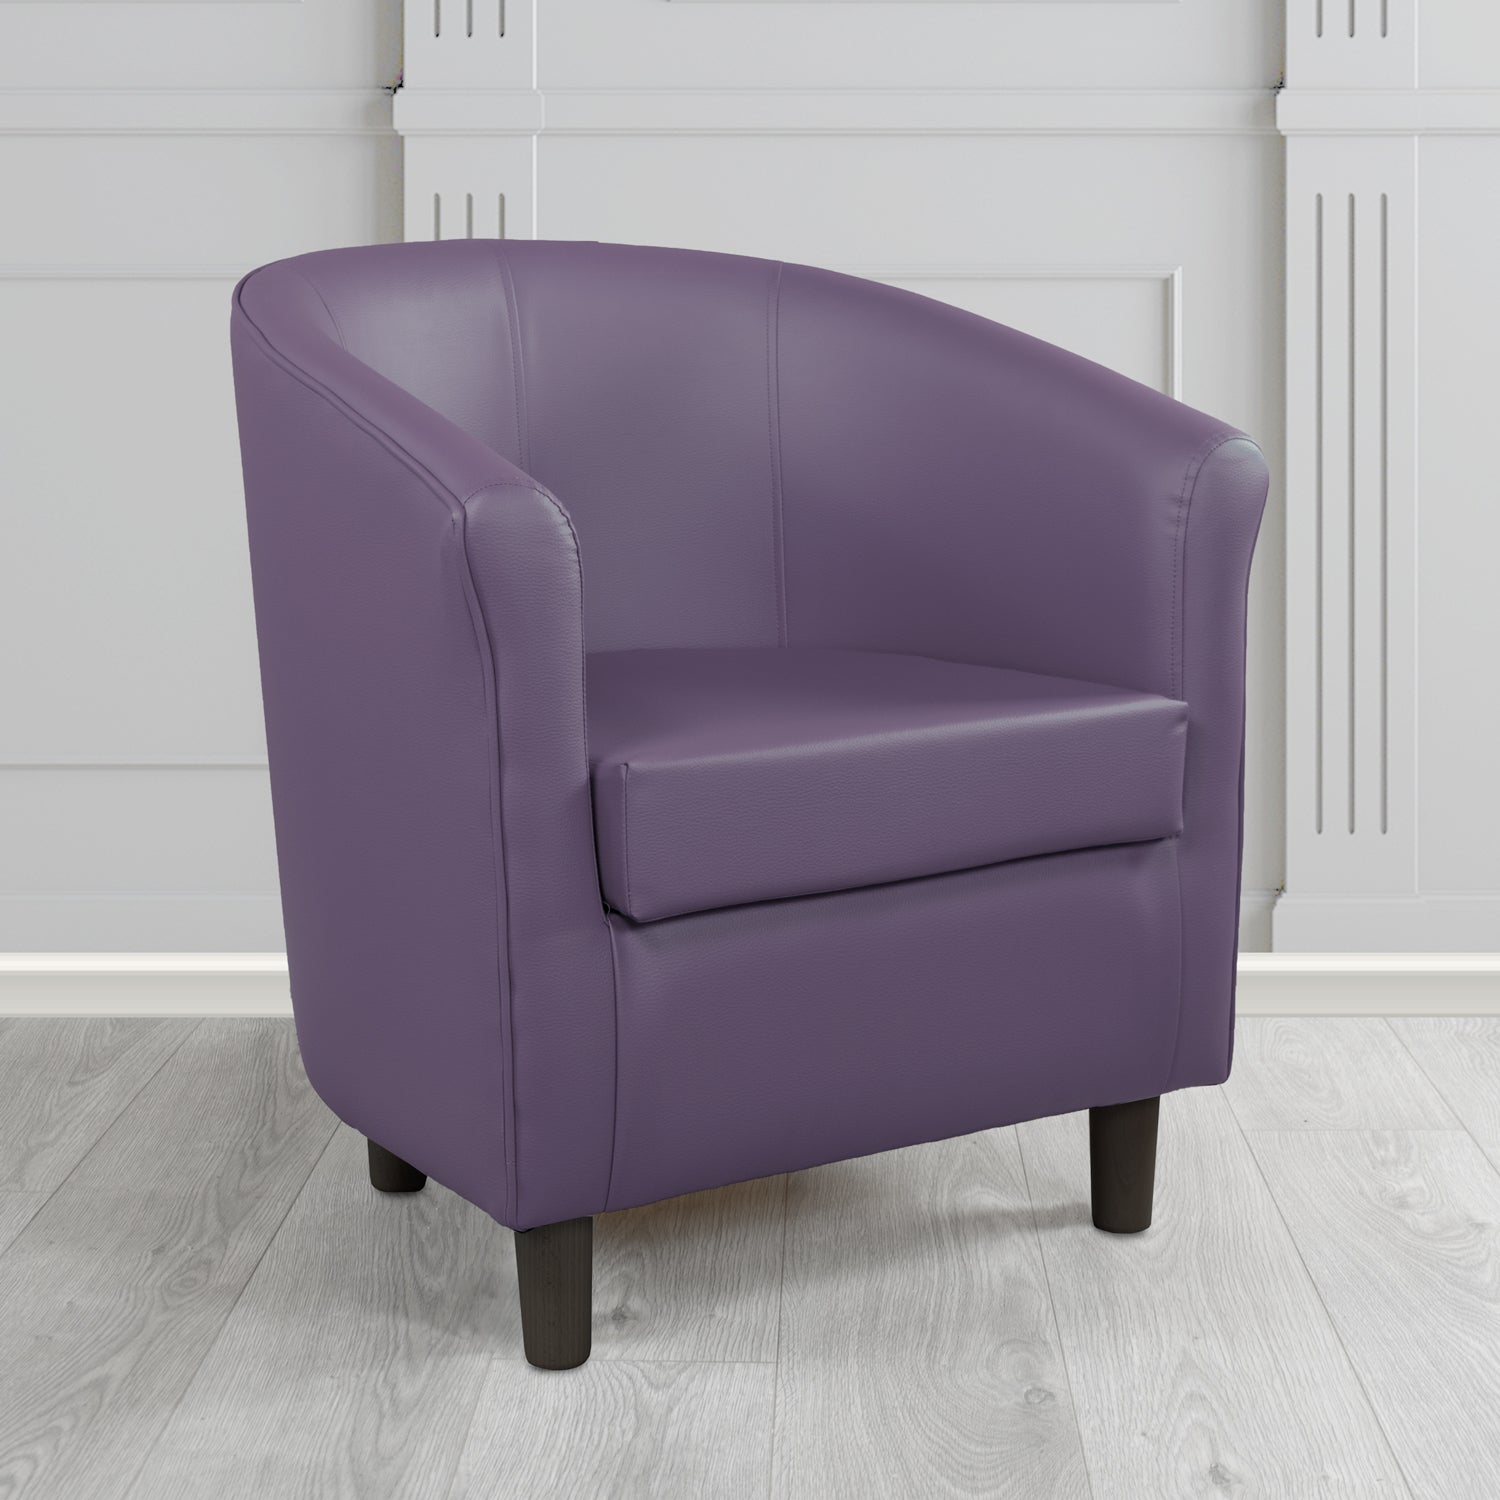 Tuscany Just Colour Professor Plum Antimicrobial Crib 5 Contract Faux Leather Tub Chair